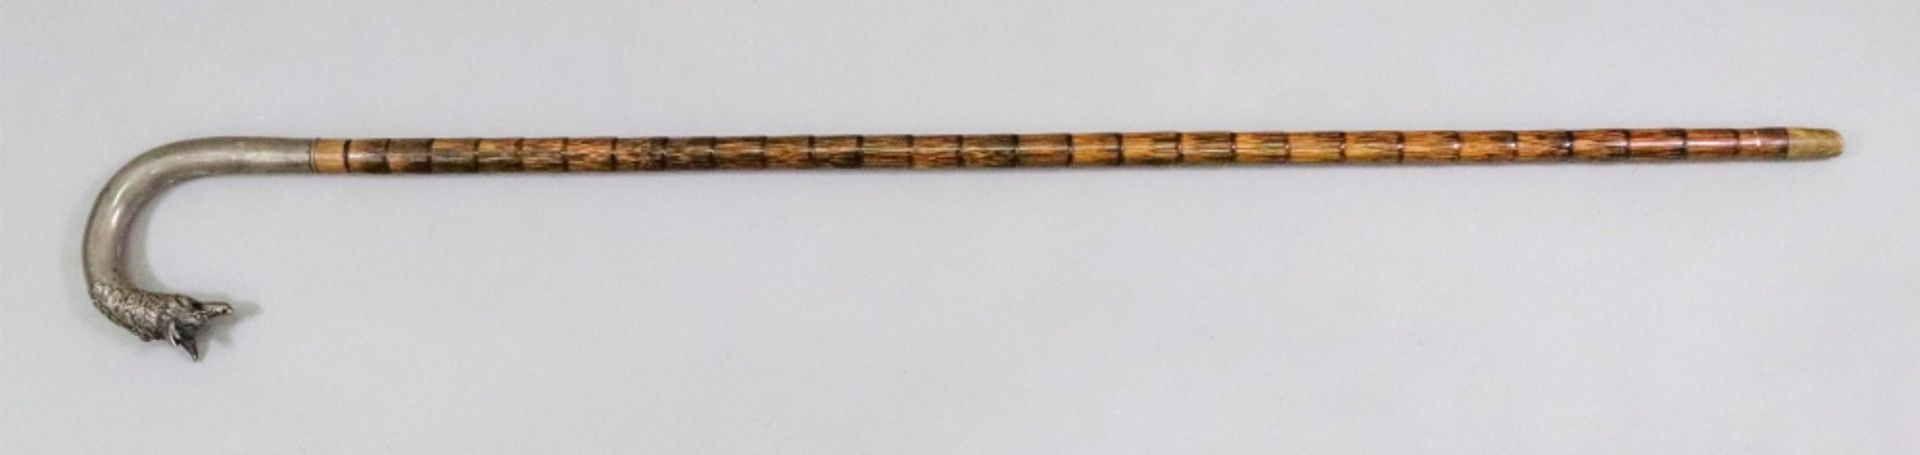 A silver mounted bamboo walking cane, Dutch, date letter unclear, late 19th century,